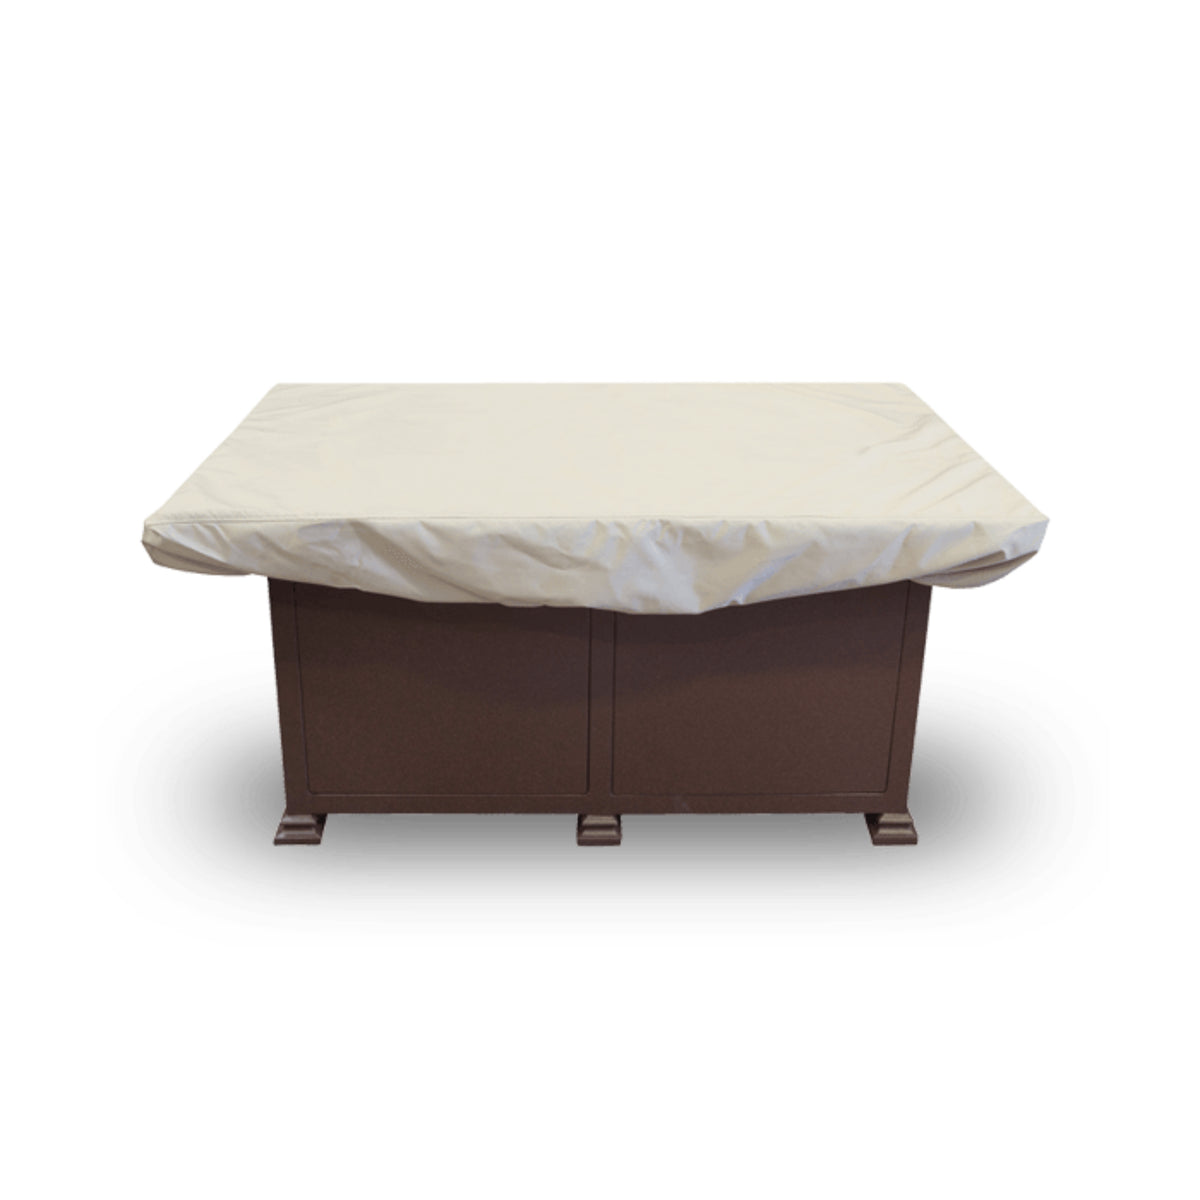 Rectangular Fire Pit/Table Cover